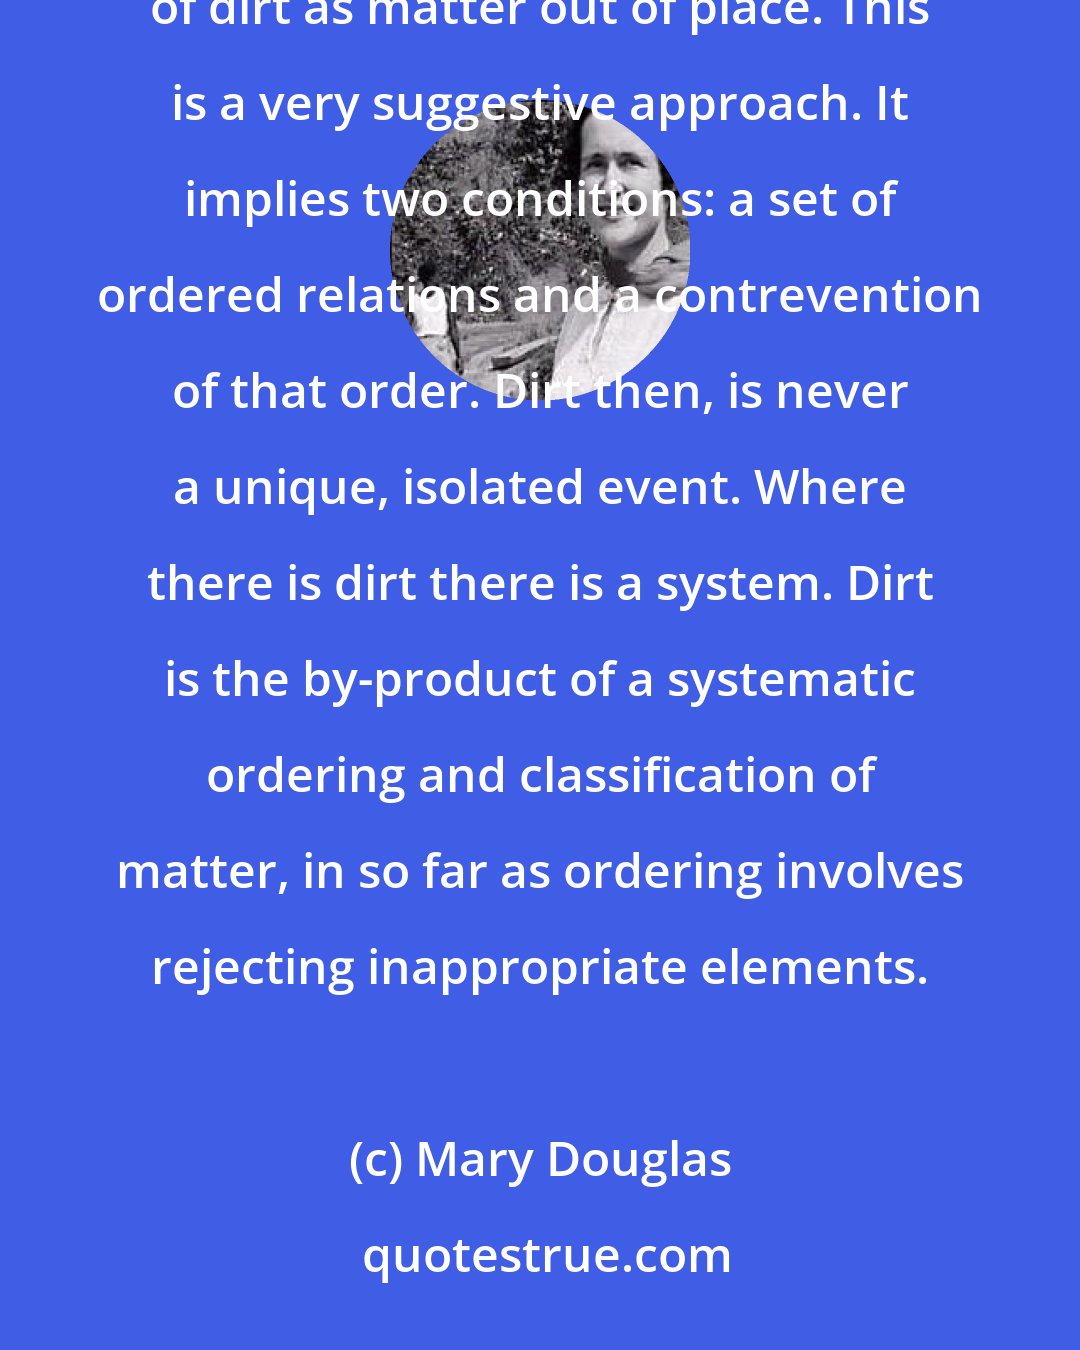 Mary Douglas: If we can abstract pathogenicity and hygiene from our notion of dirt, we are left with the old definition of dirt as matter out of place. This is a very suggestive approach. It implies two conditions: a set of ordered relations and a contrevention of that order. Dirt then, is never a unique, isolated event. Where there is dirt there is a system. Dirt is the by-product of a systematic ordering and classification of matter, in so far as ordering involves rejecting inappropriate elements.